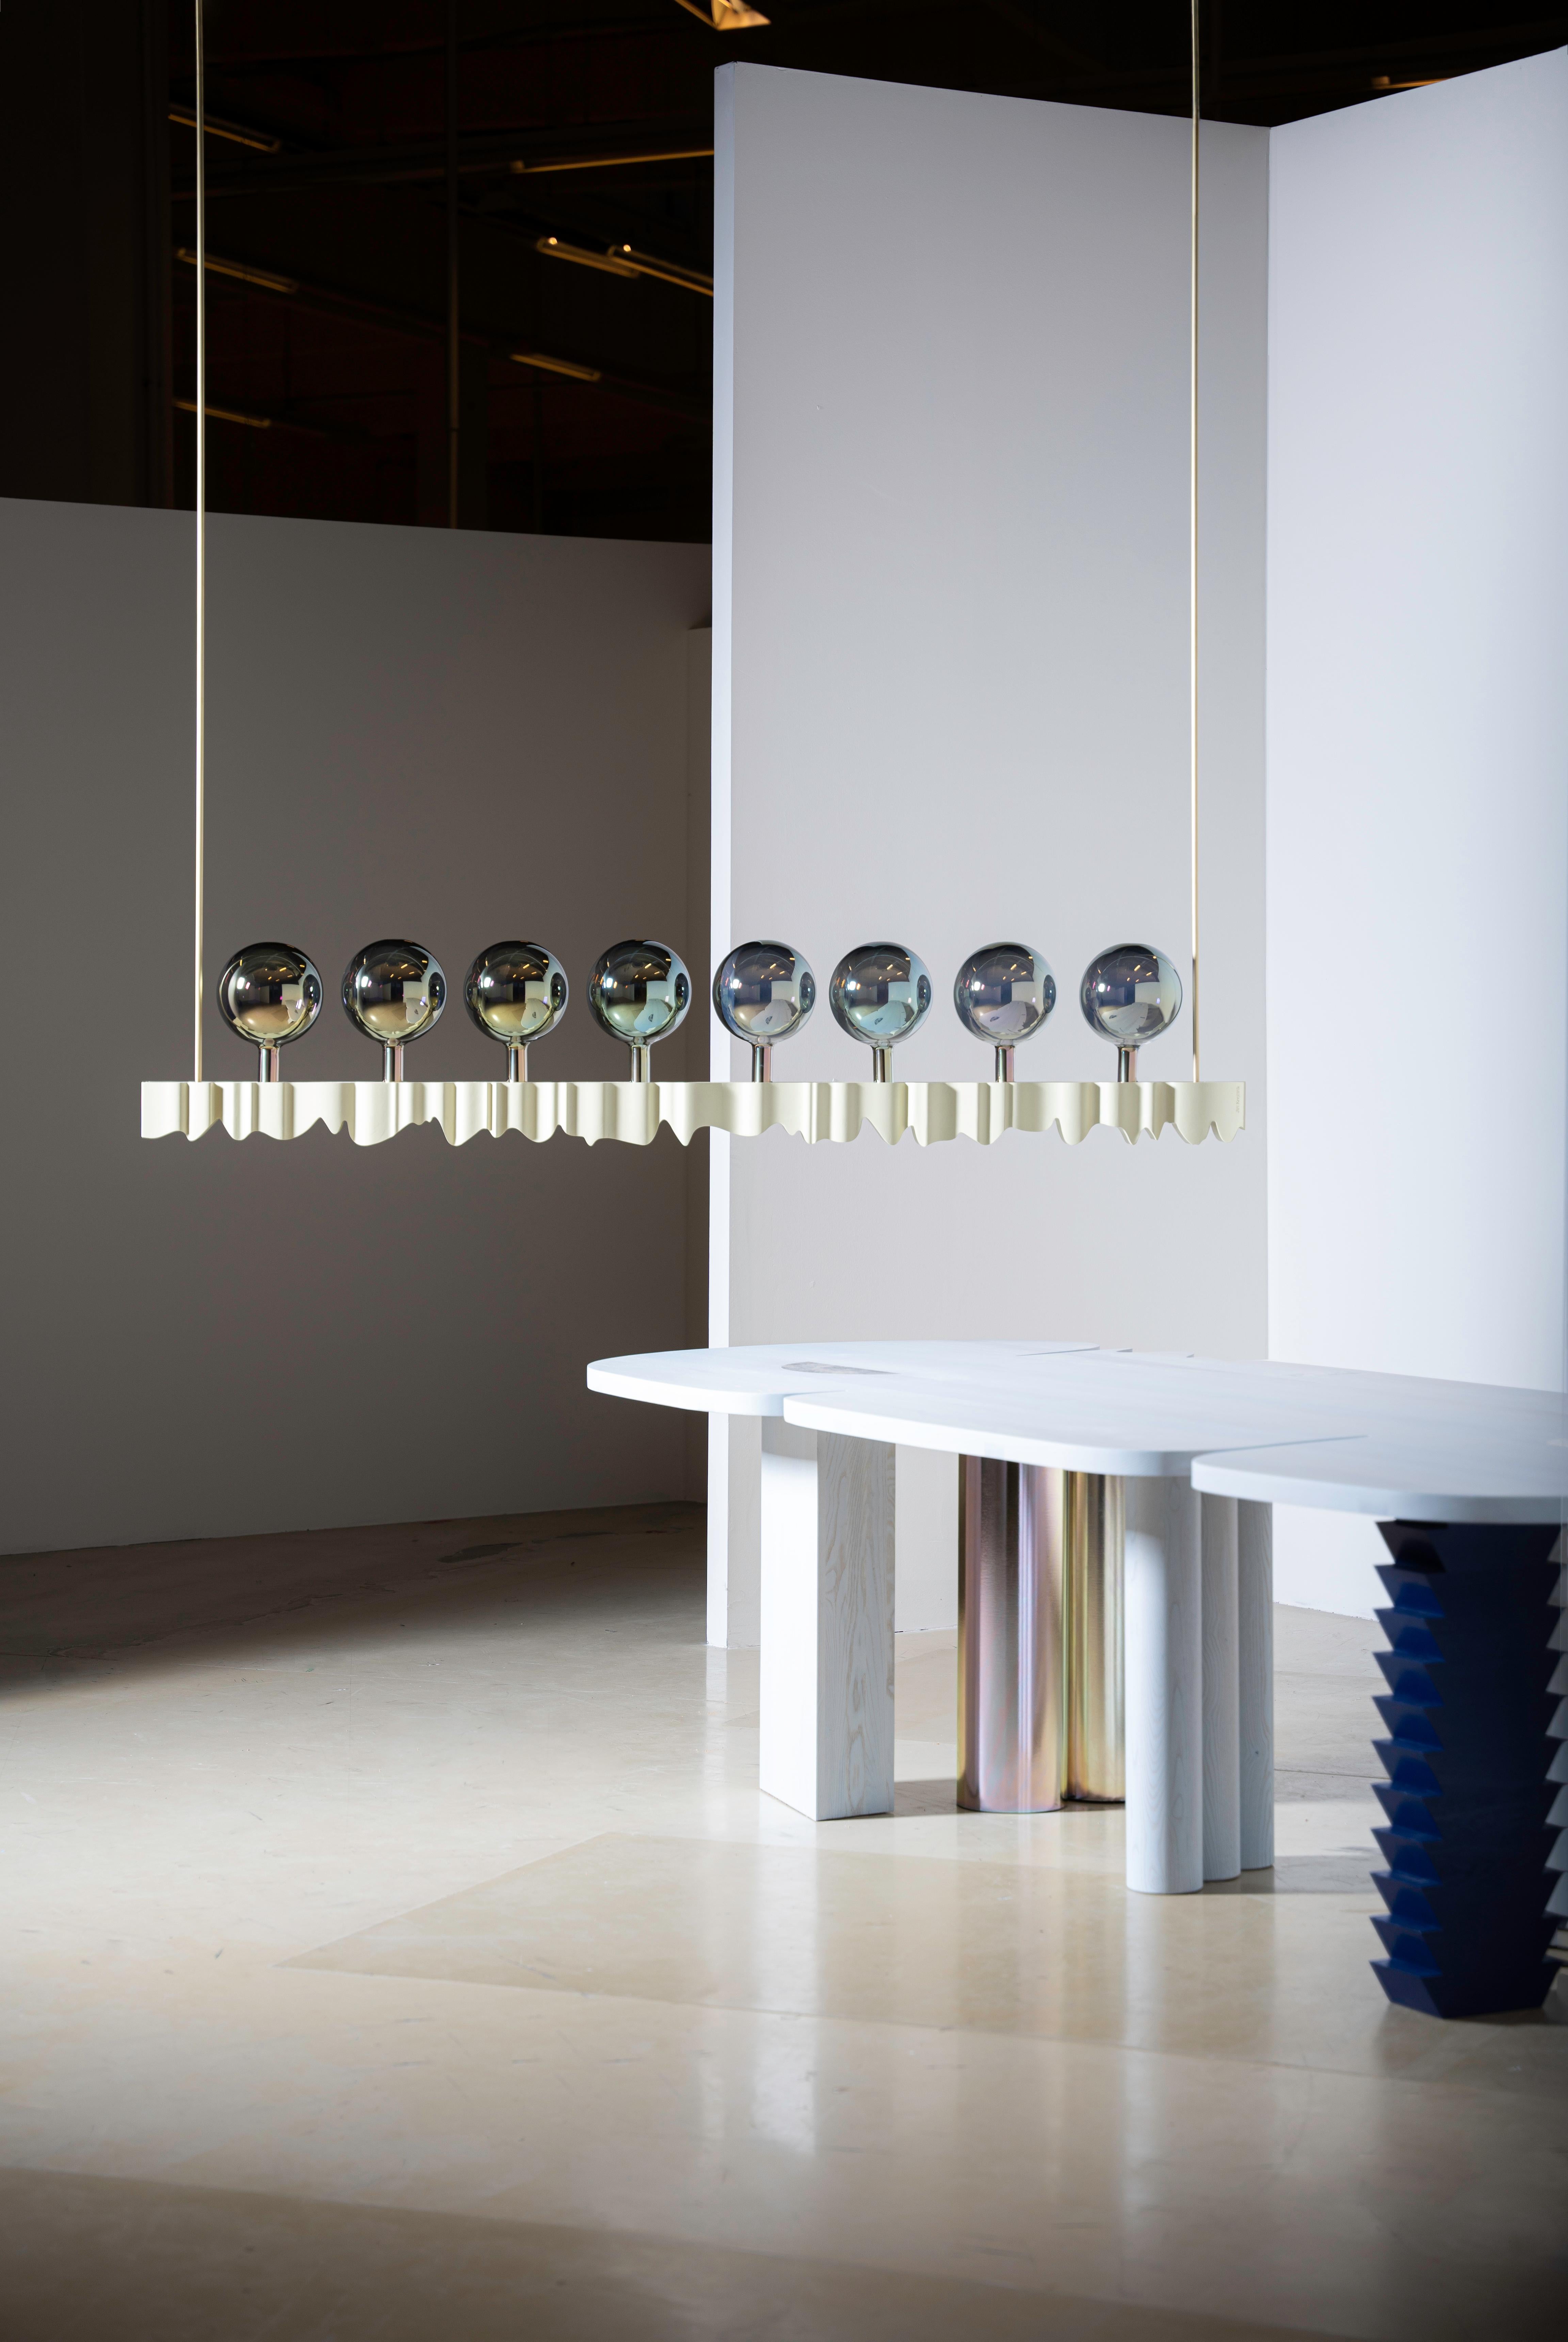 YKB is a monumental luminaire, contrasting lacquered solid ash wood, brass construction, and metal coated glass spheres. The aesthetics of YKB is an authorial interpretation and a bow to the work of Czech architect Jan Kotěra and Slovak architect